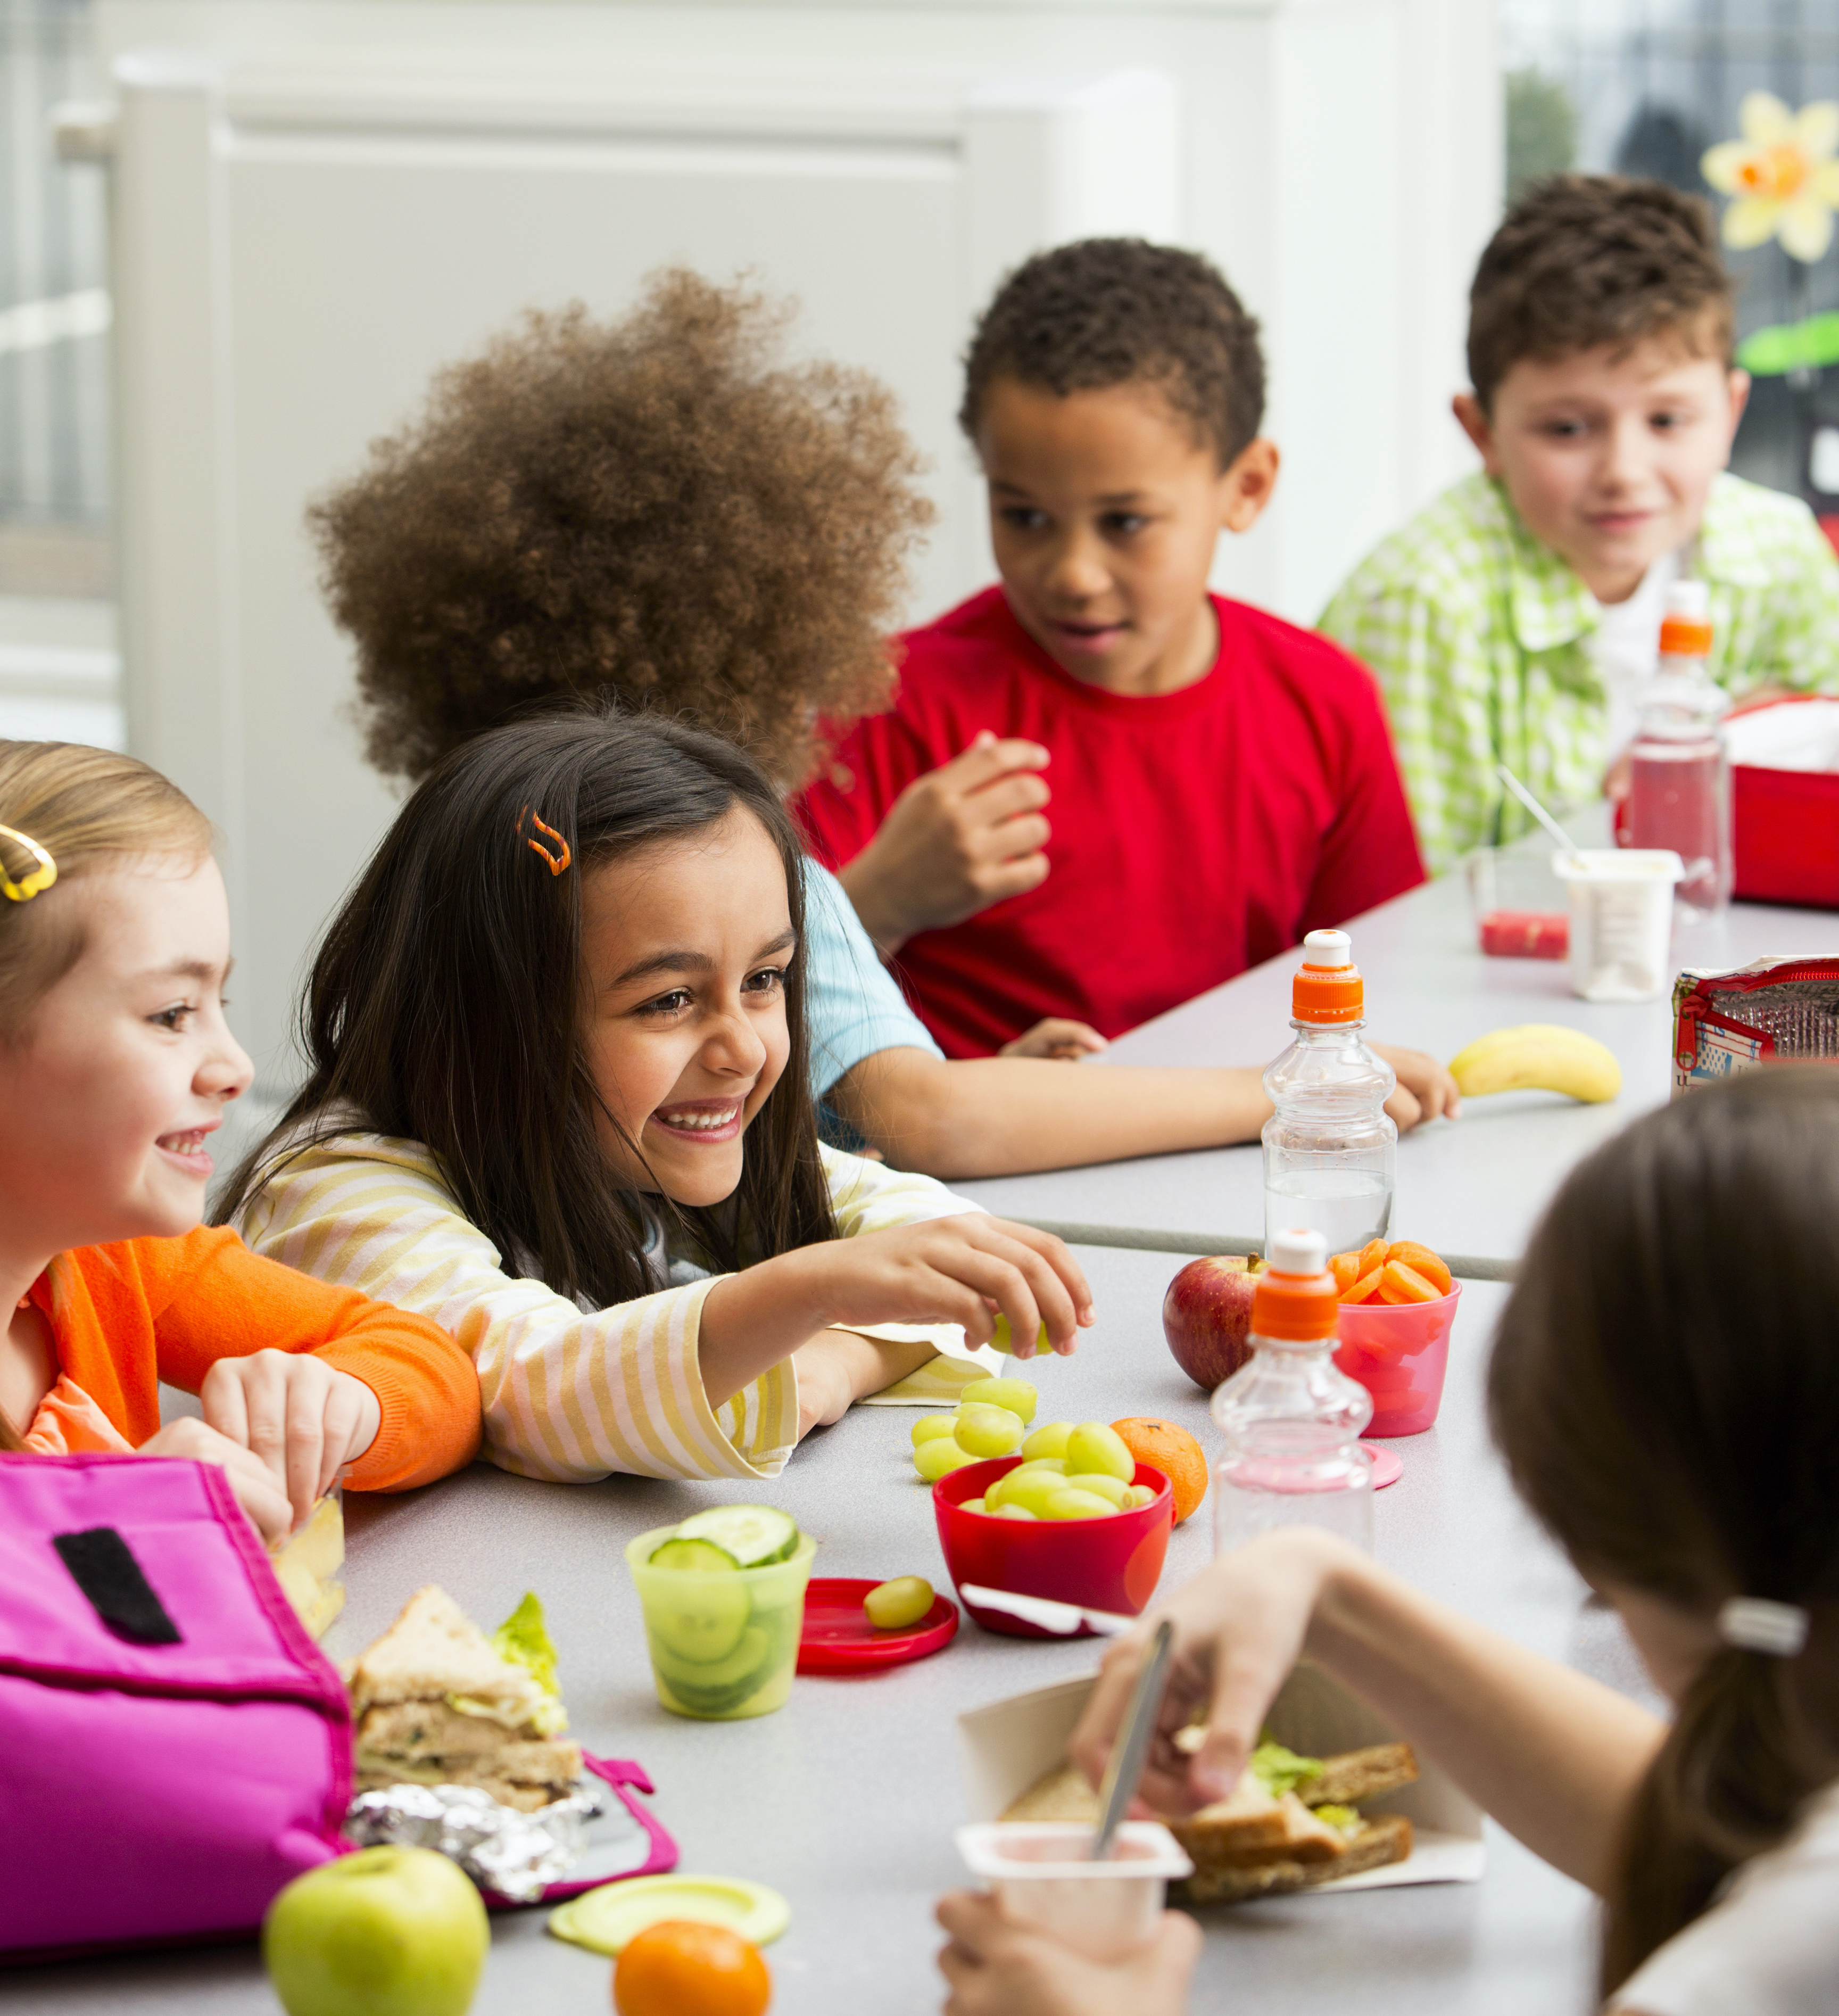 Children sitting at a table at school and enjoy their packed lunches together